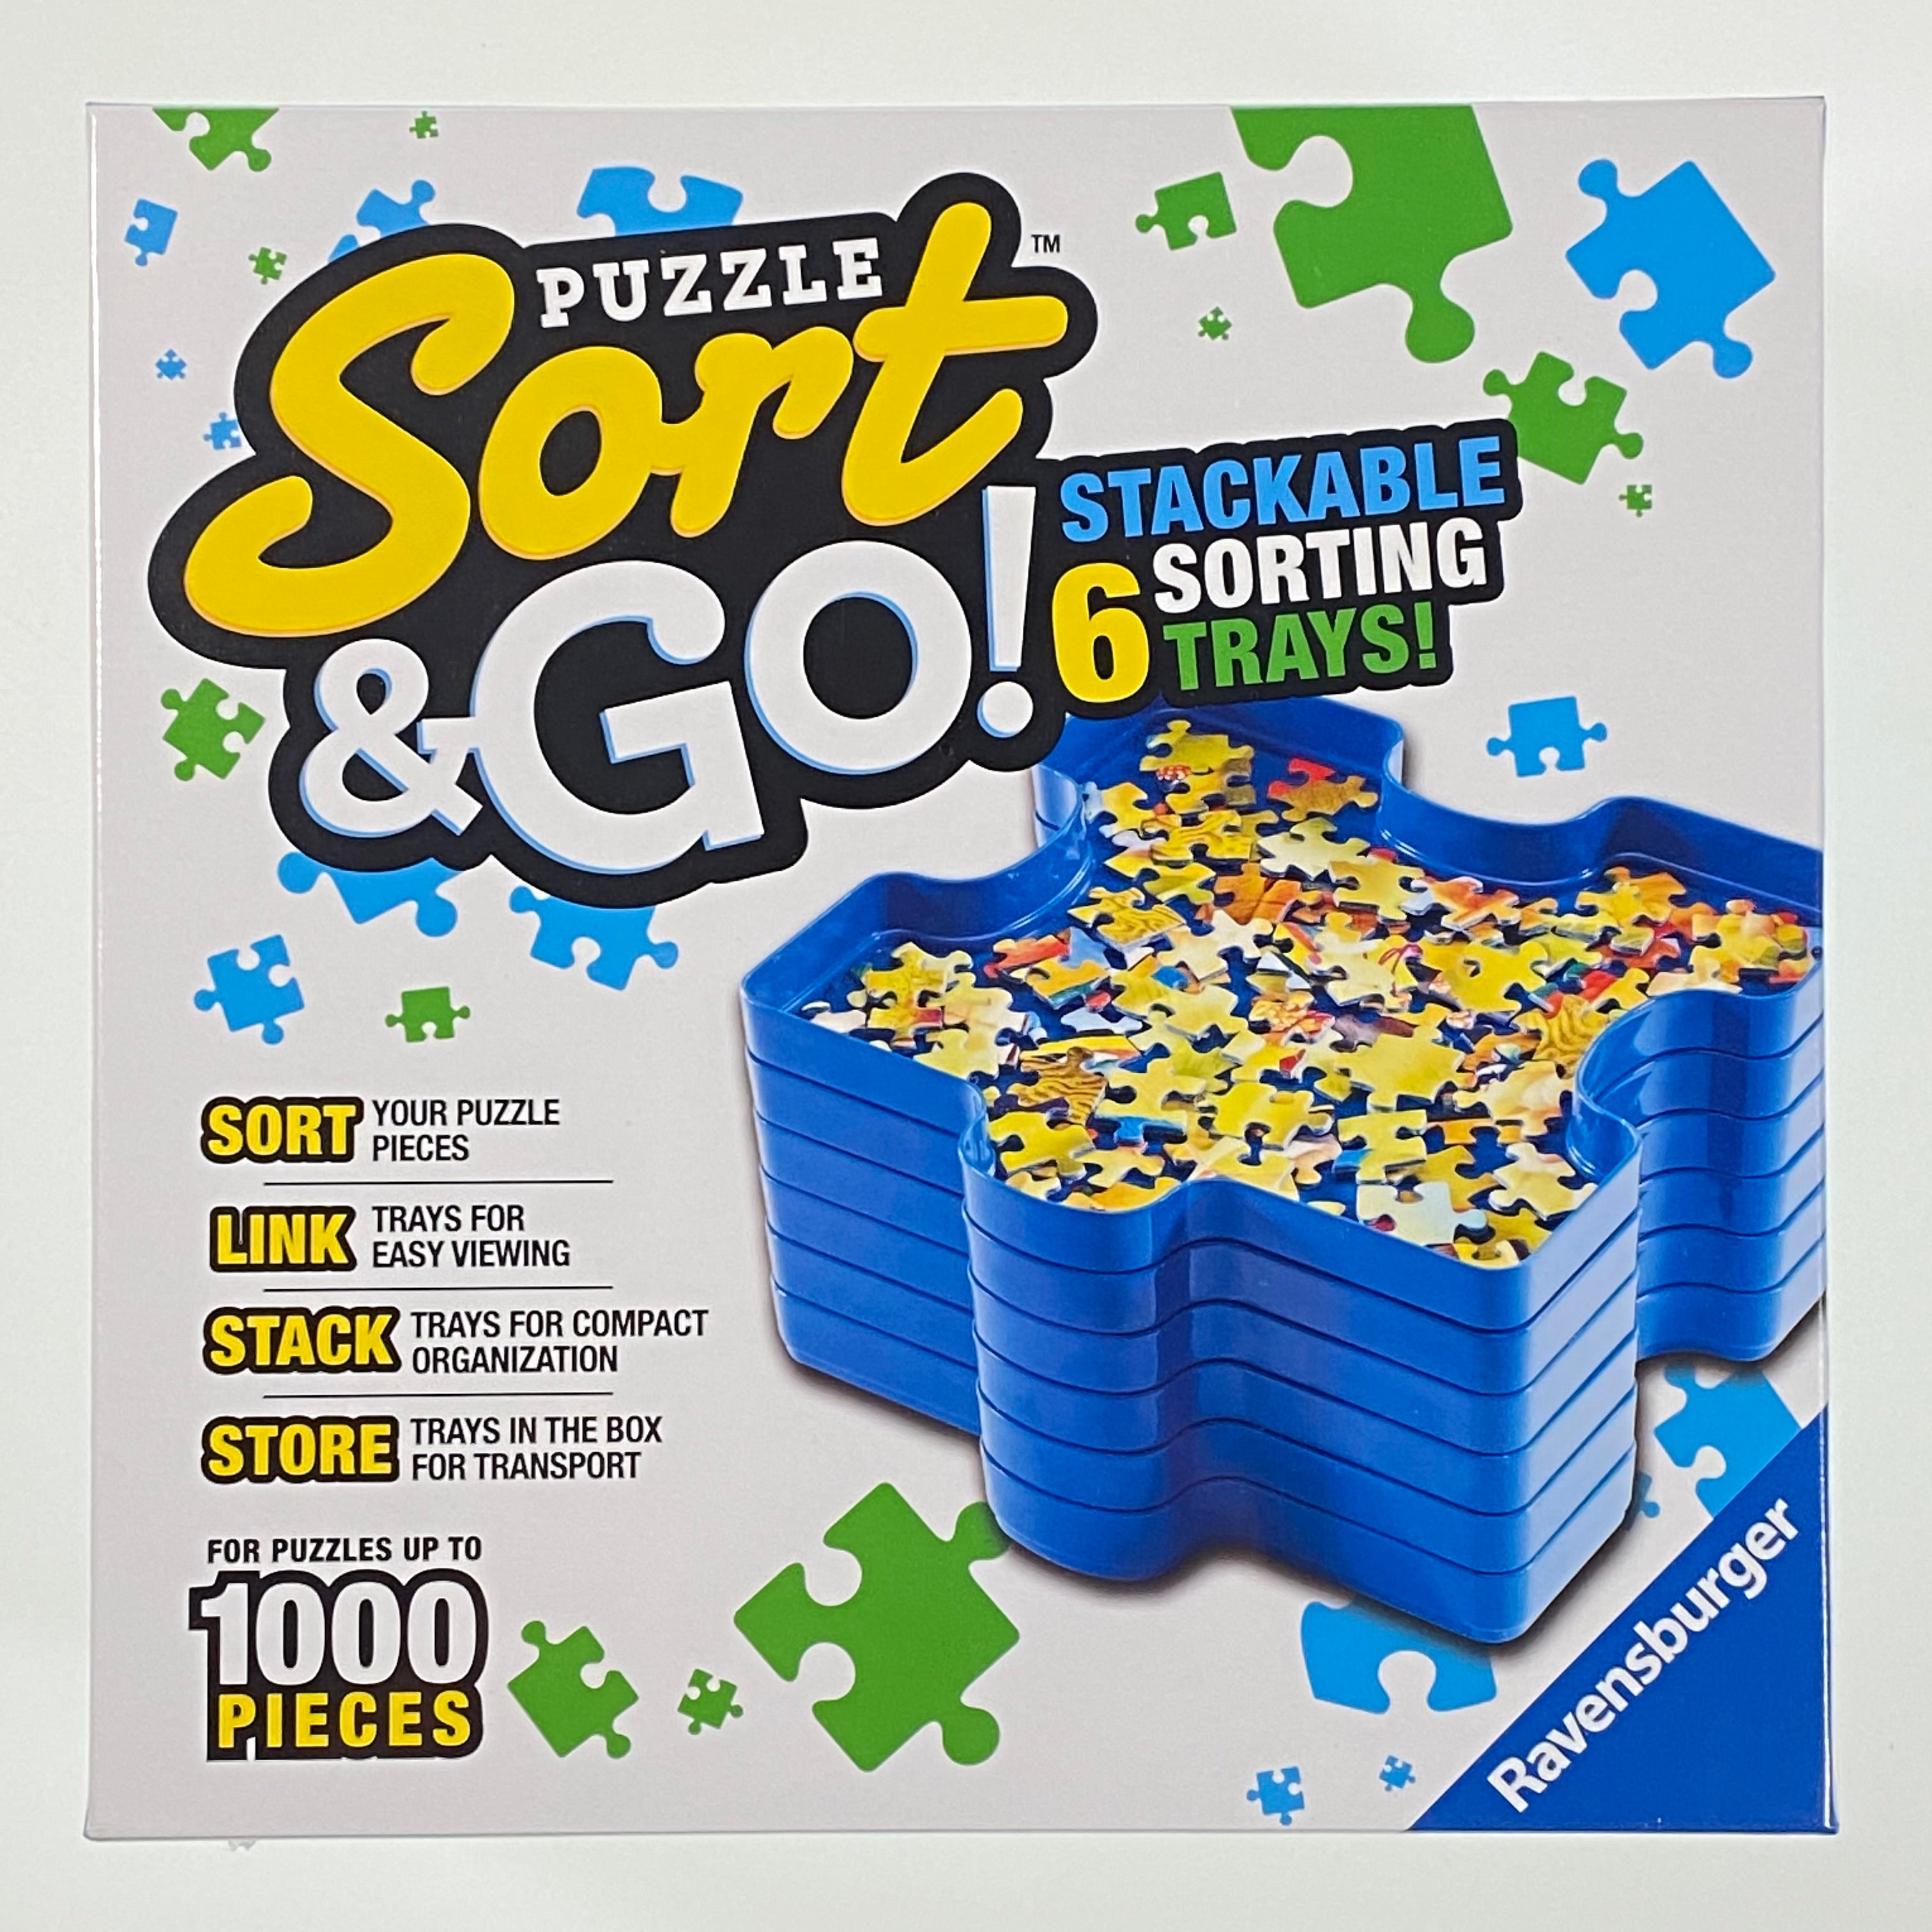 Ravensburger Puzzle Sort & Go Stackable Sorting Trays | Sort and Store Up  to 1,000 pieces